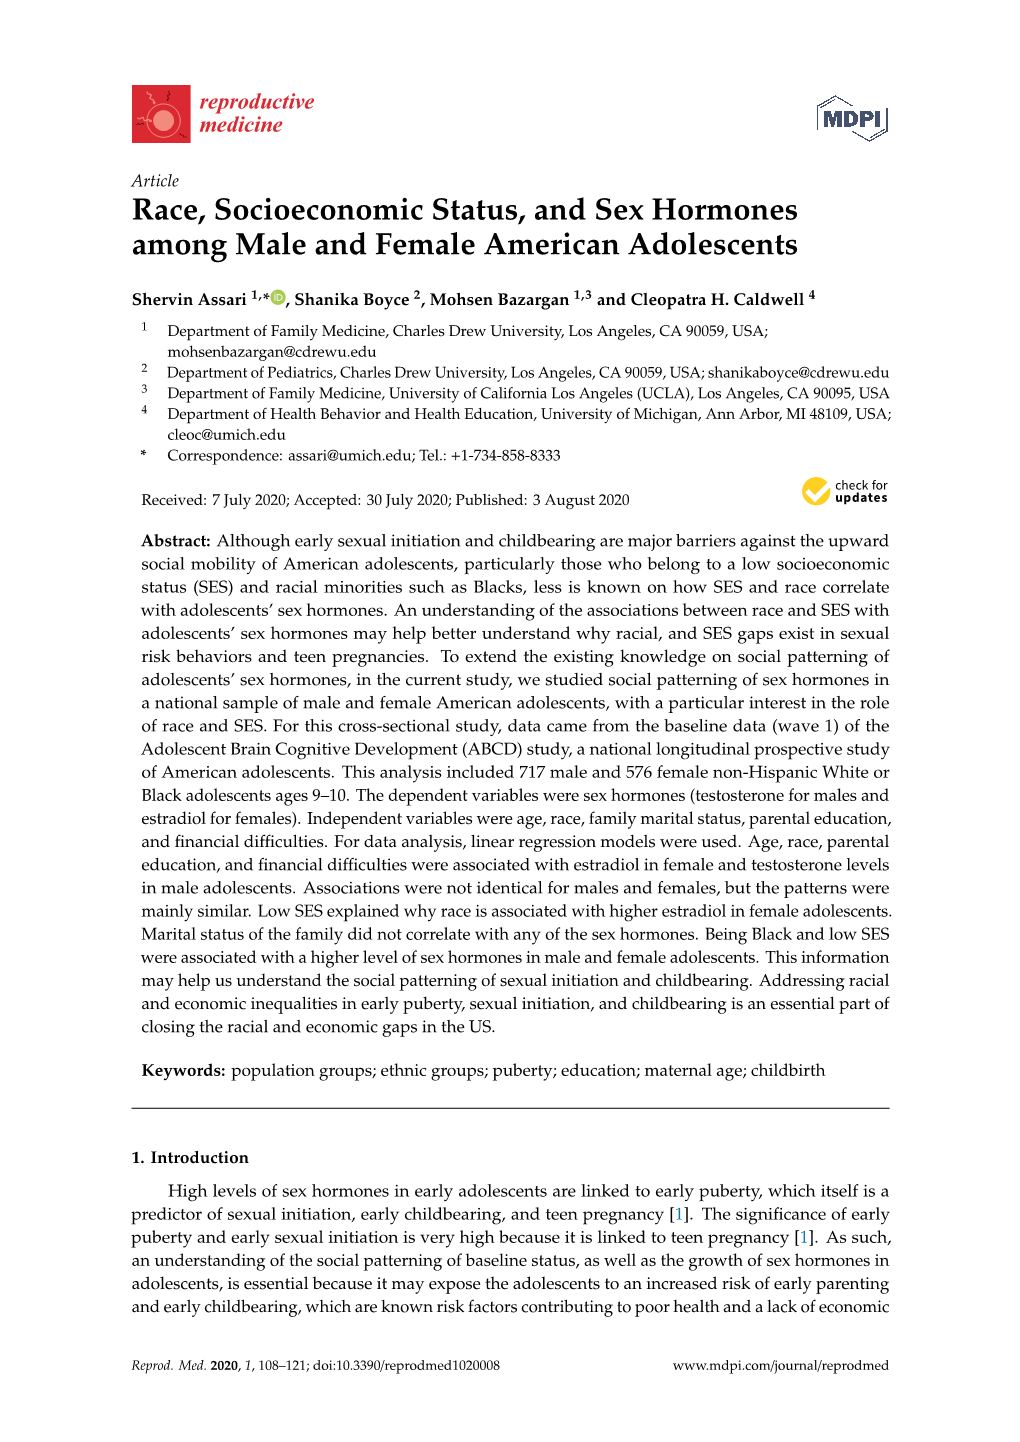 Race, Socioeconomic Status, and Sex Hormones Among Male and Female American Adolescents